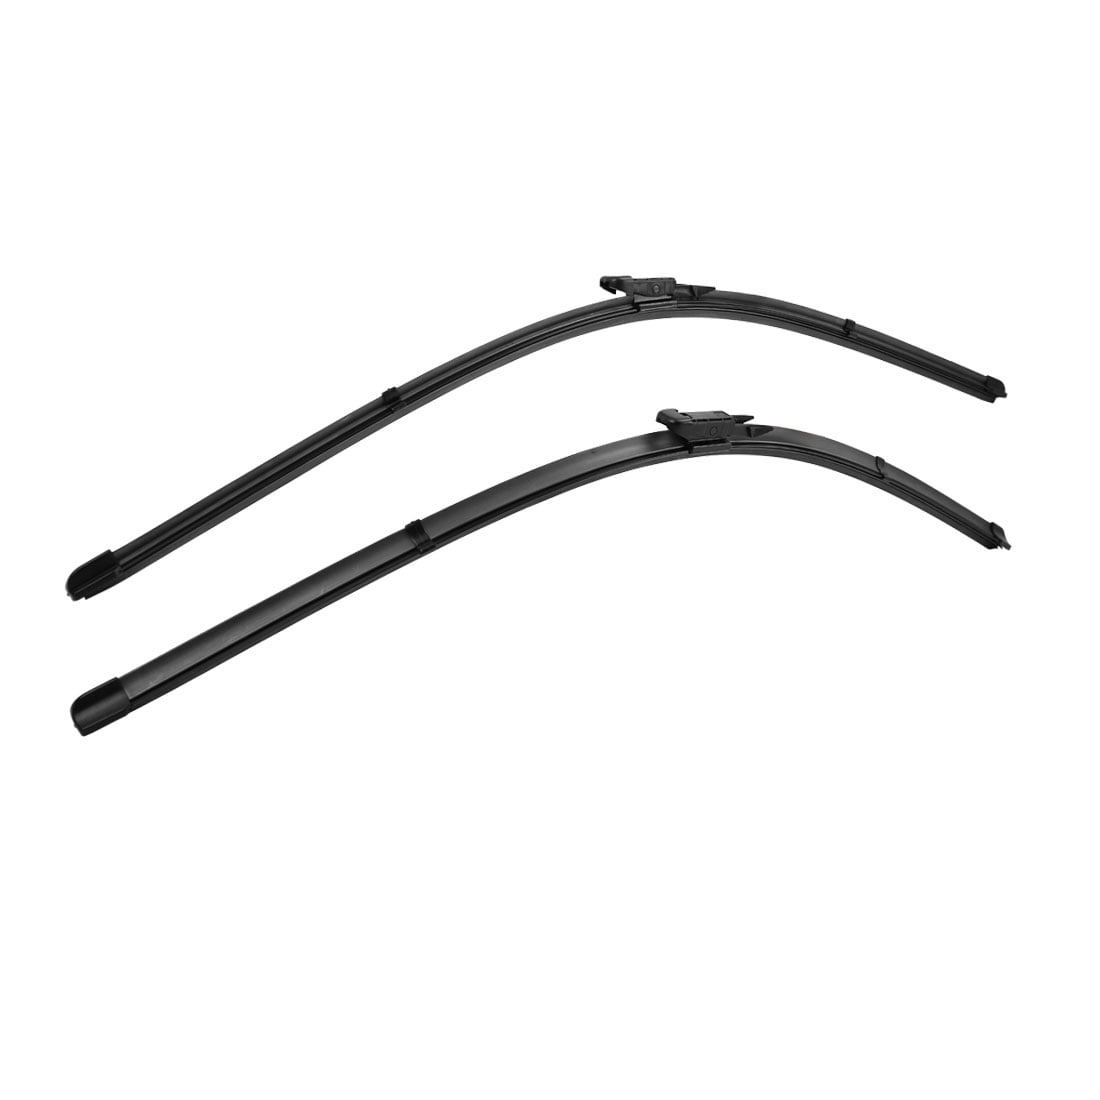 27"+ 27" Windshield Wiper Blades for 2014 2015 2016 Ford Fusion - Walmart.com - Walmart.com 2015 Ford Fusion Se Windshield Wipers Size